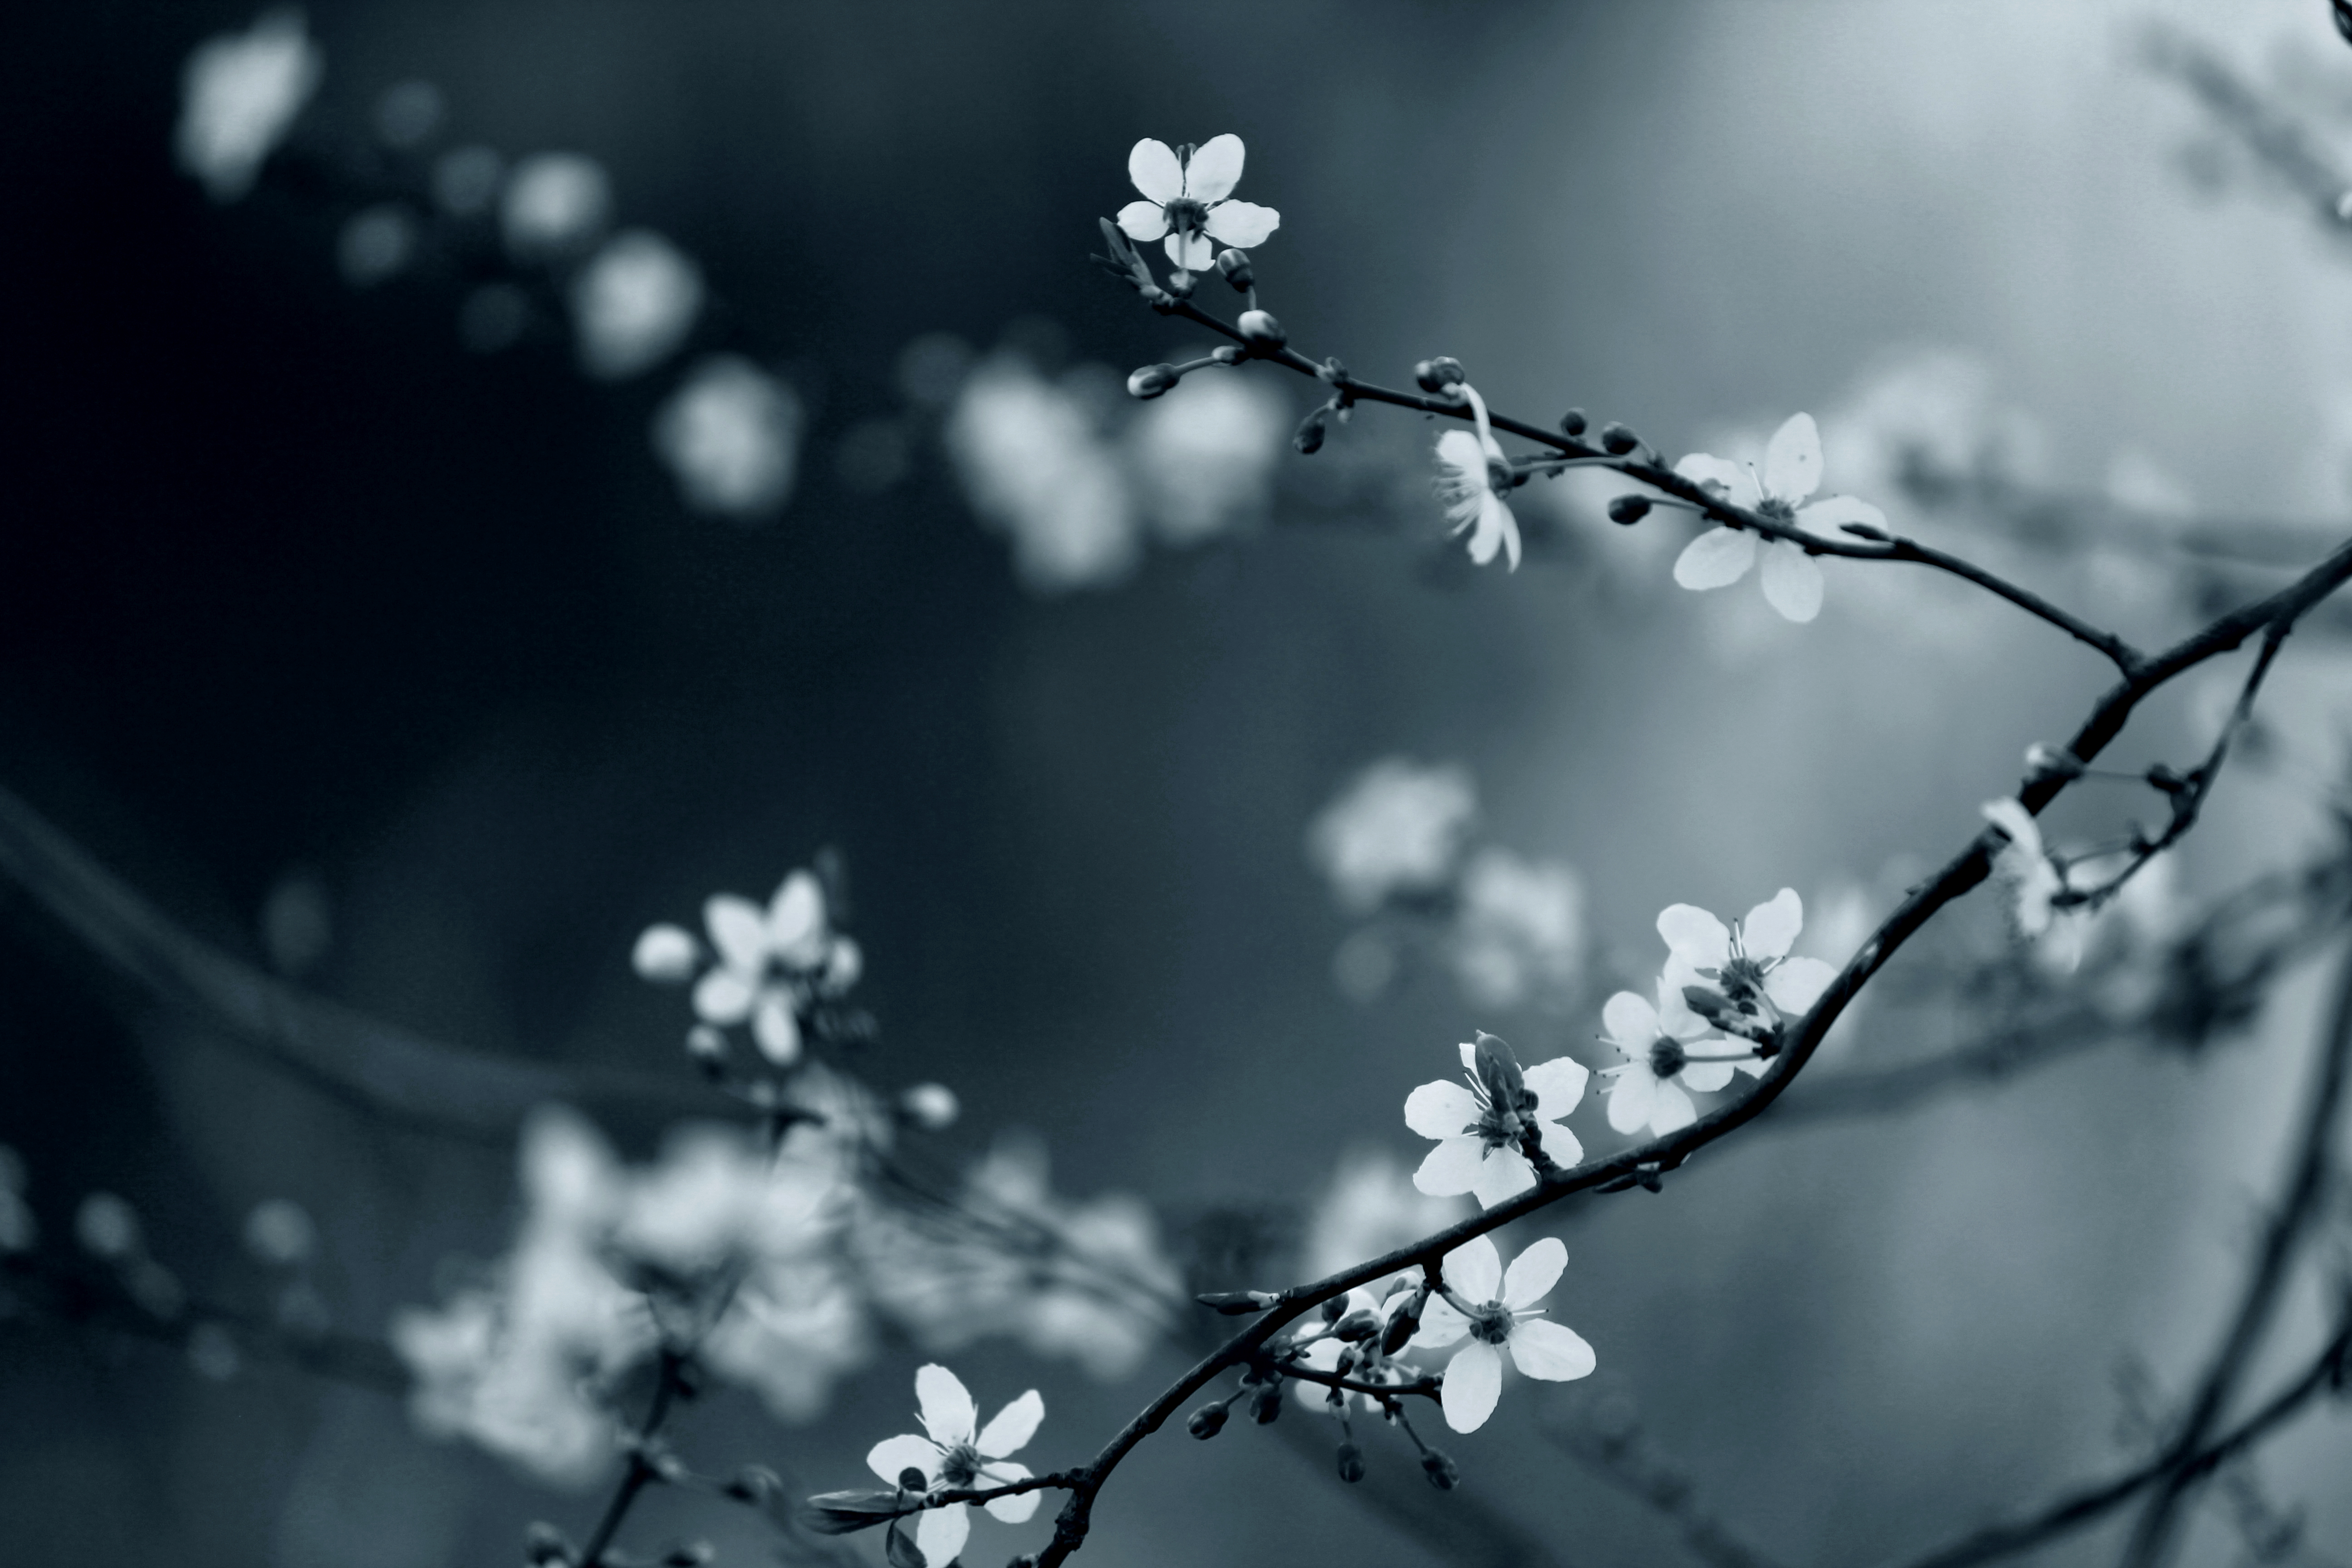 Wallpaper, sunlight, water, nature, sky, winter, branch, morning, cherry blossom, bokeh, spring, Freezing, backlight, light, cloud, tree, leaf, flower, dof, signsofspring, darkness, march, buds, daytime, twig, computer wallpaper, atmosphere of earth